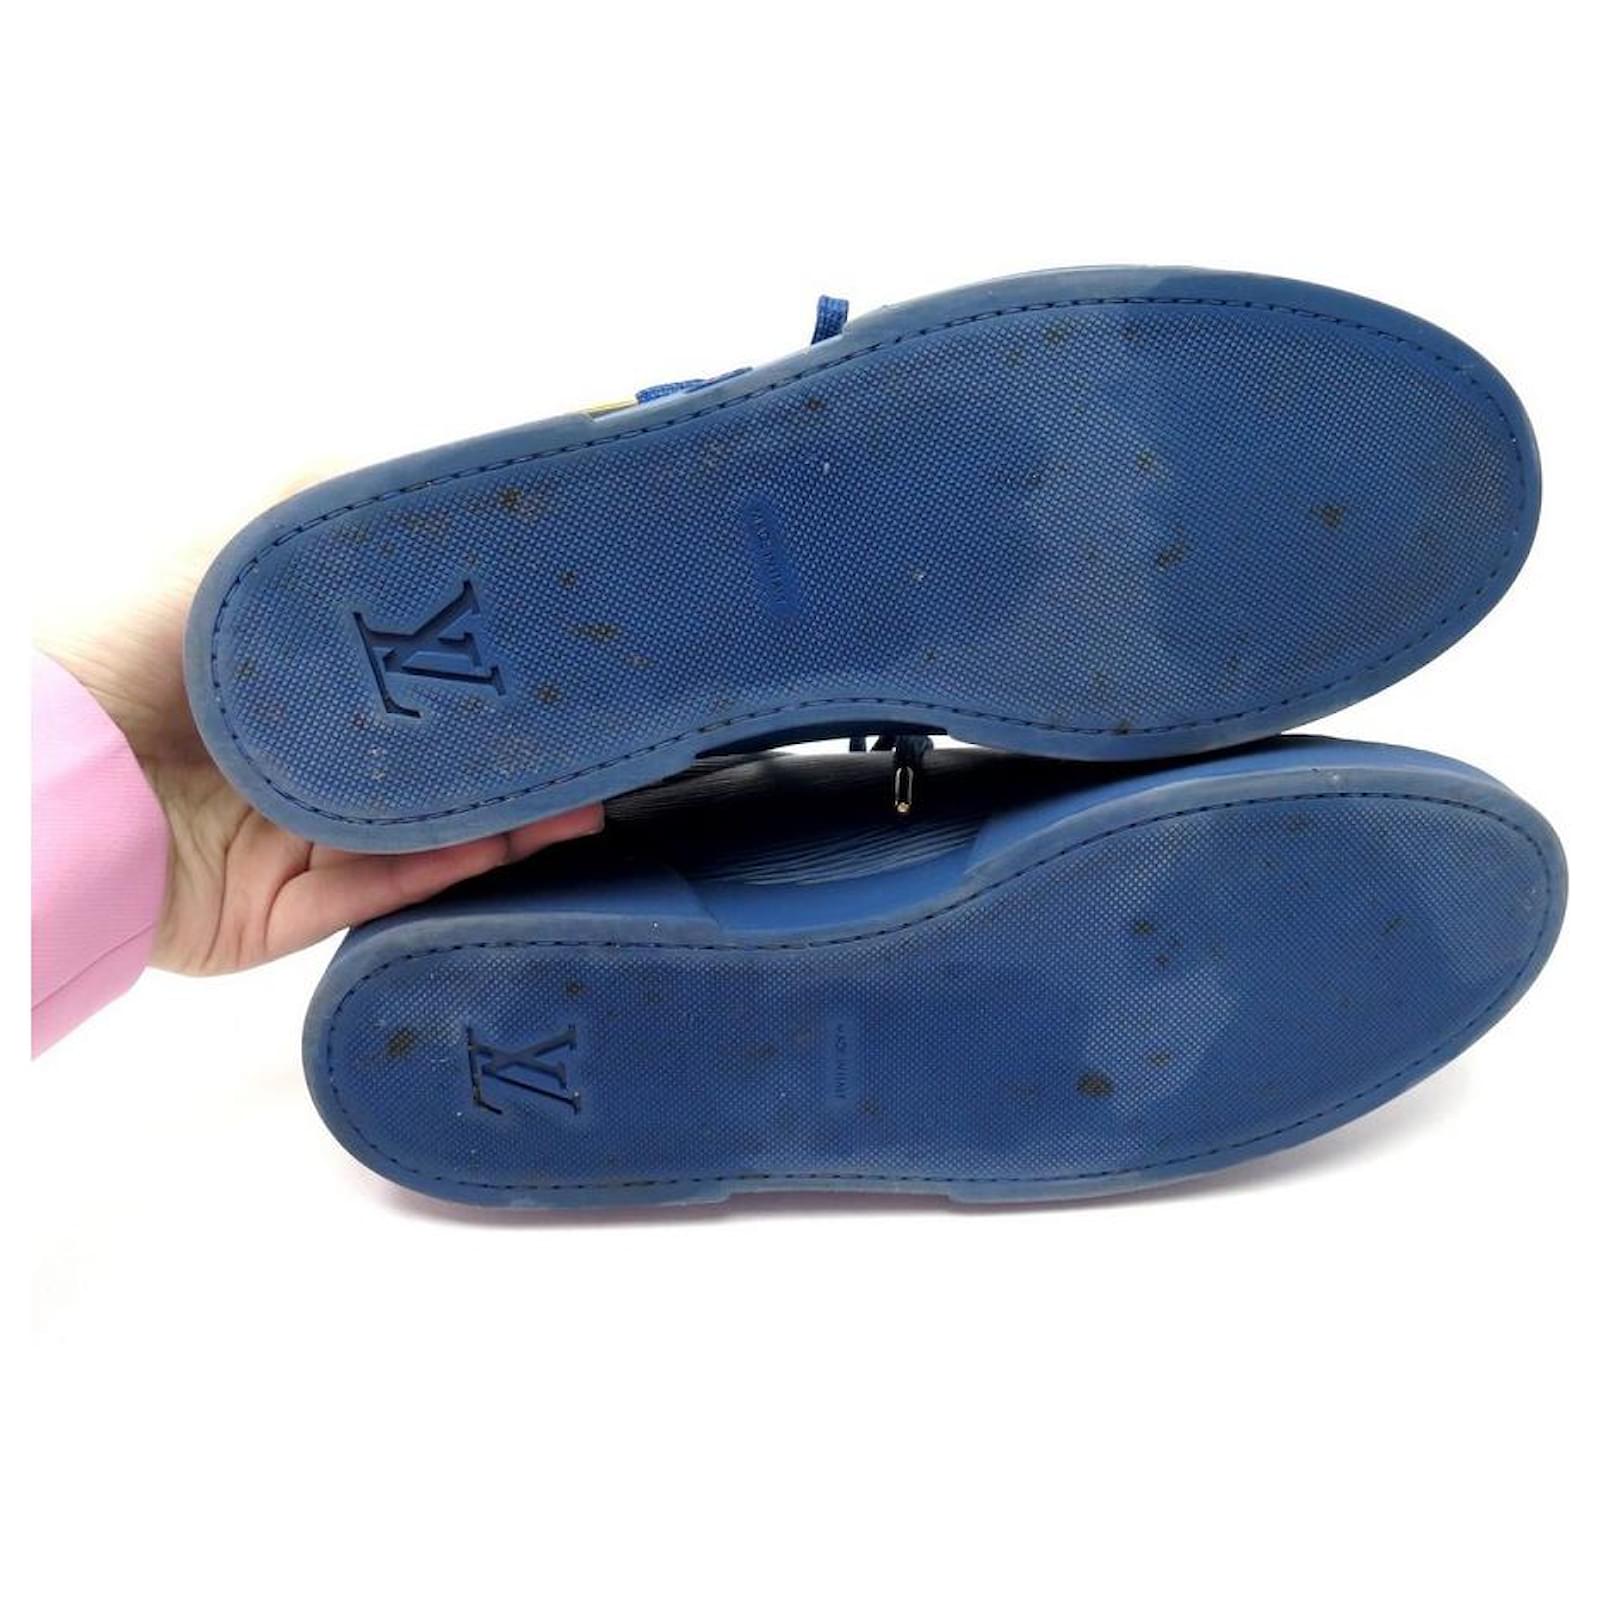 LOUIS VUITTON sneakers SHOES 8 42 BLUE EPI LEATHER SNEAKERS